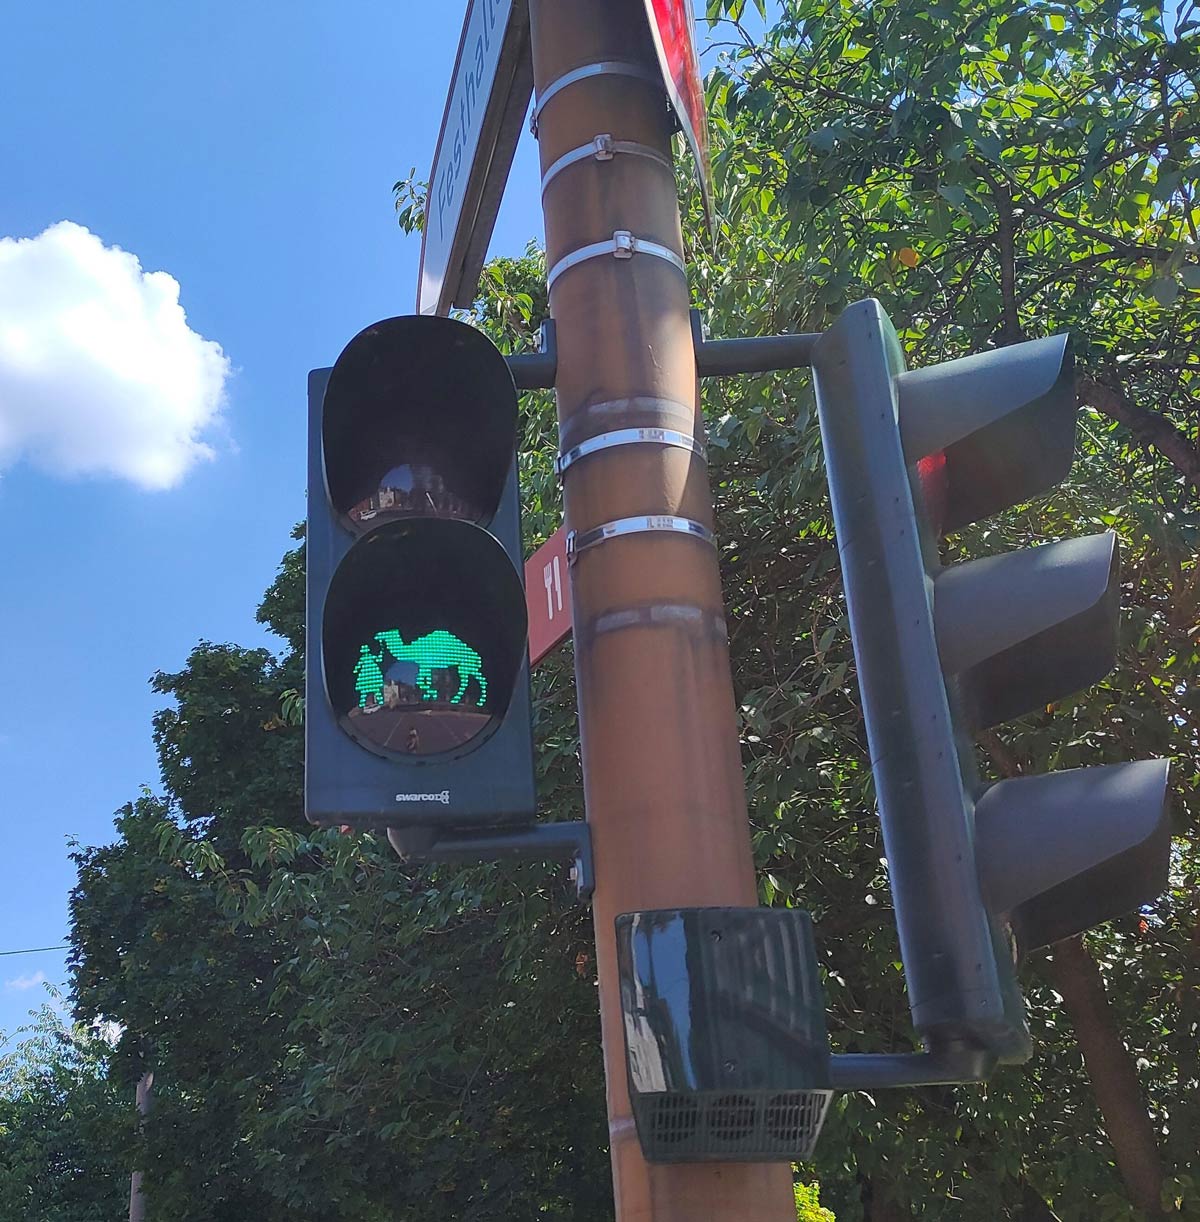 This traffic light in Germany has a little girl and a camel as signal lights